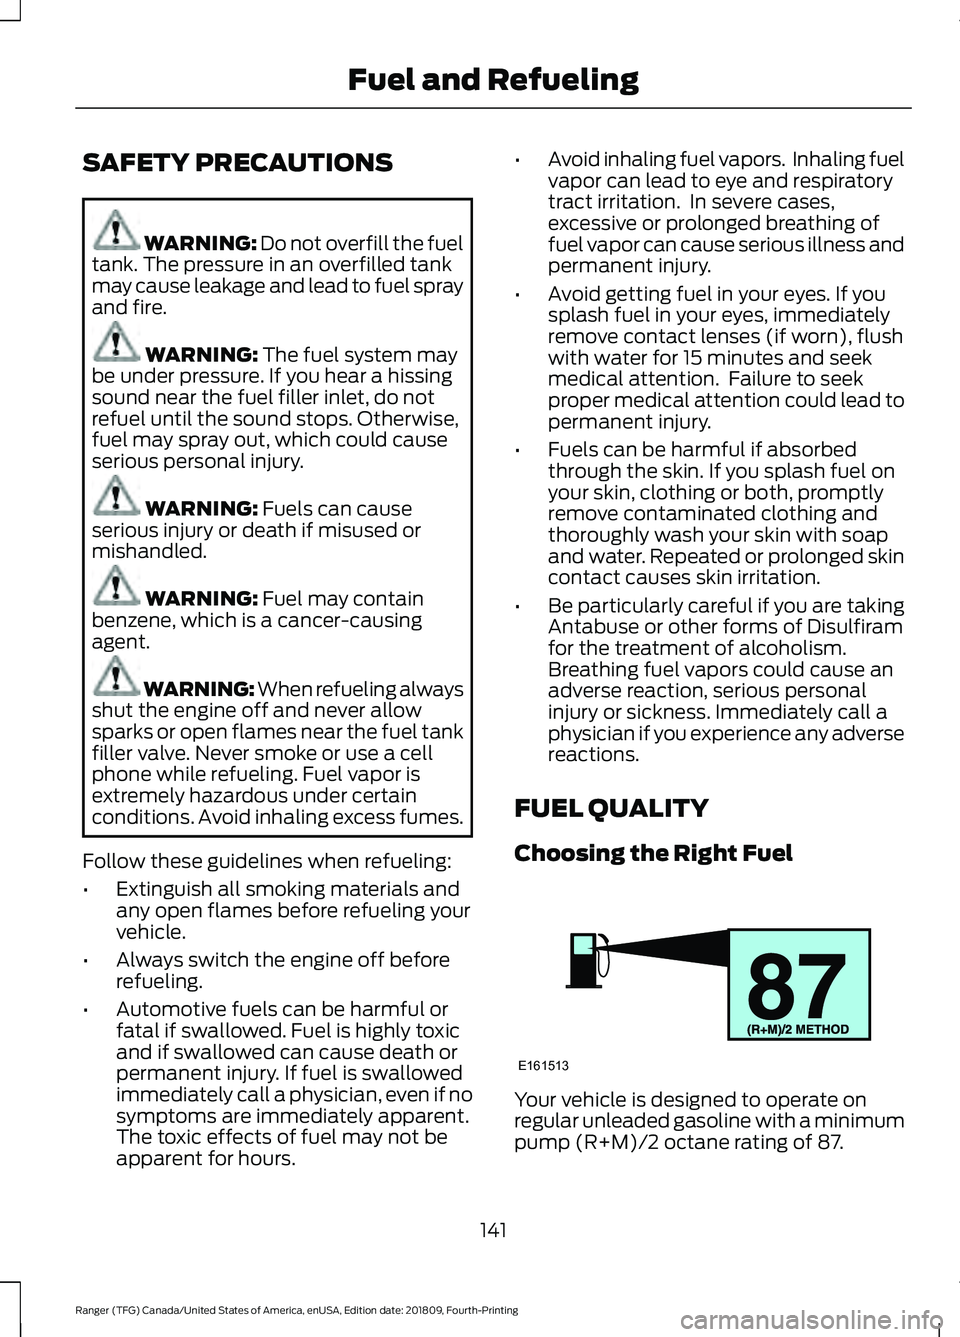 FORD RANGER 2019  Owners Manual SAFETY PRECAUTIONS
WARNING: Do not overfill the fuel
tank. The pressure in an overfilled tank
may cause leakage and lead to fuel spray
and fire. WARNING: 
The fuel system may
be under pressure. If you